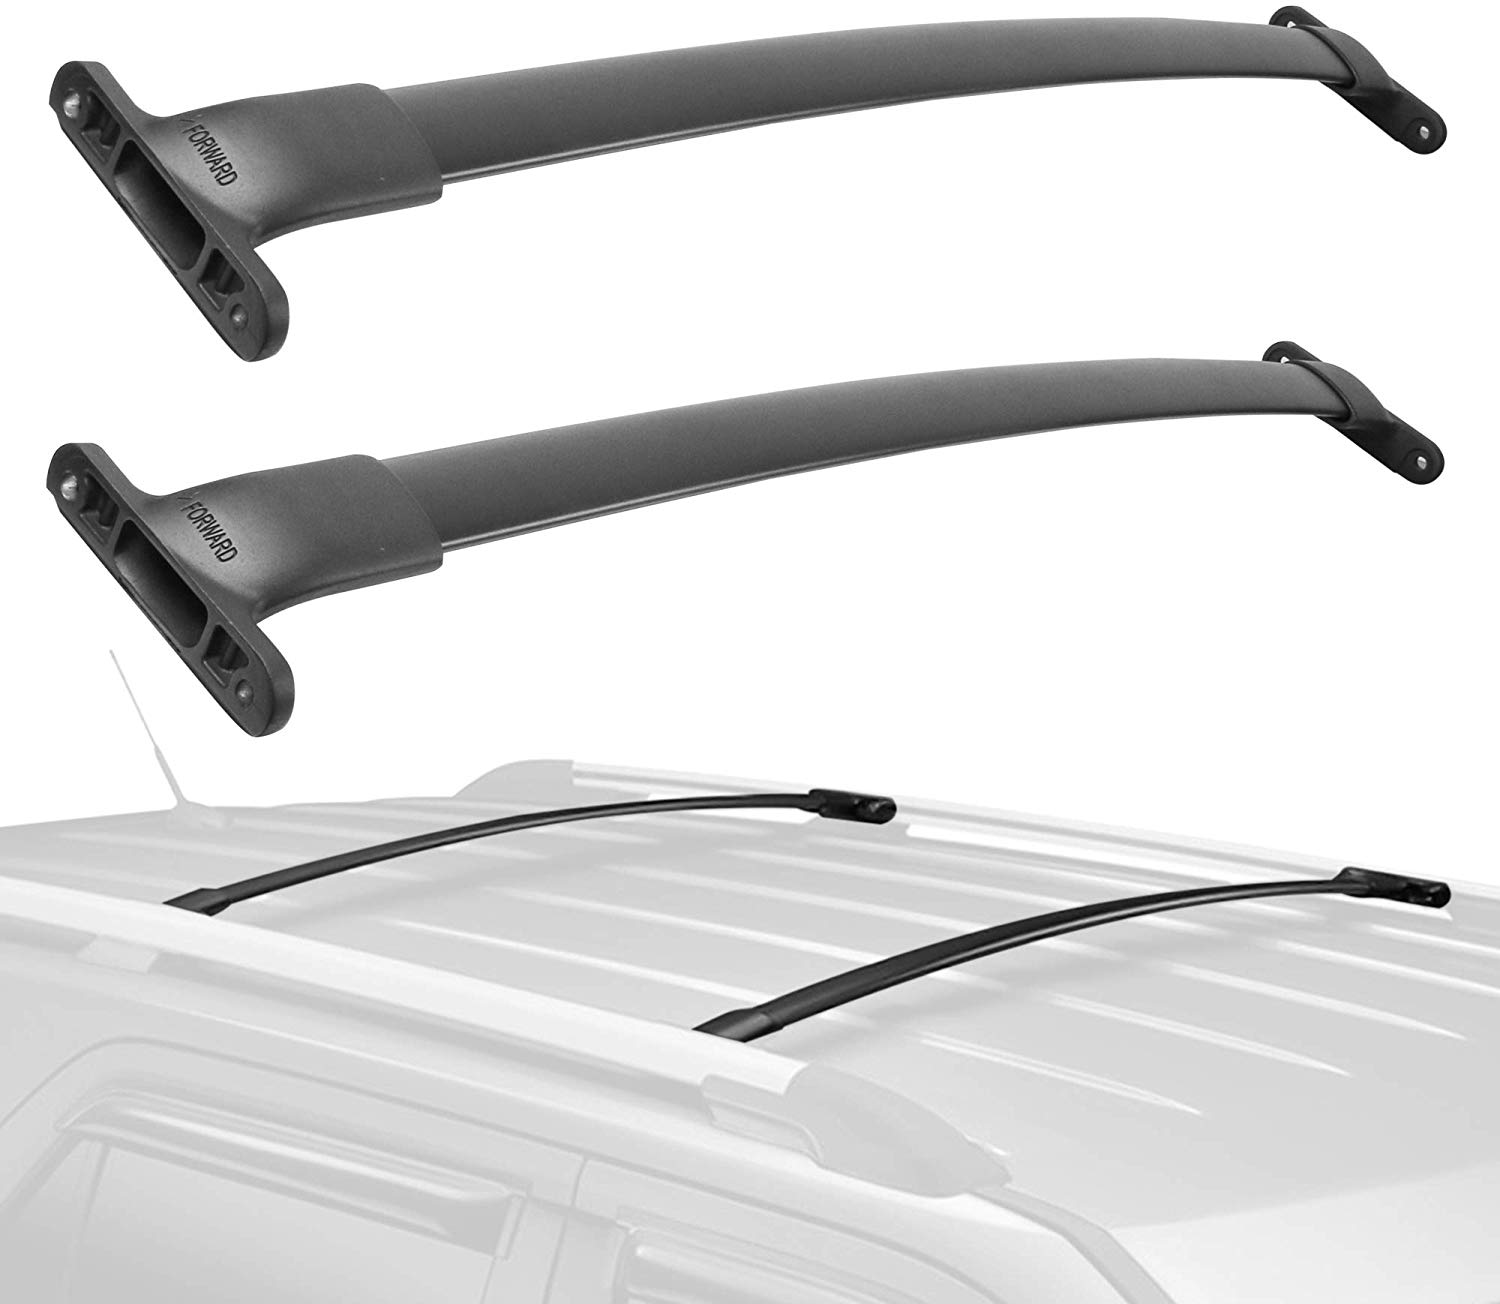 Lot Detail - ROOF RACK CROSSBARS FOR 2016, 2017,2018 & 2019 FORD EXPLORER 2016 Ford Explorer Roof Rack Cross Bars Installation